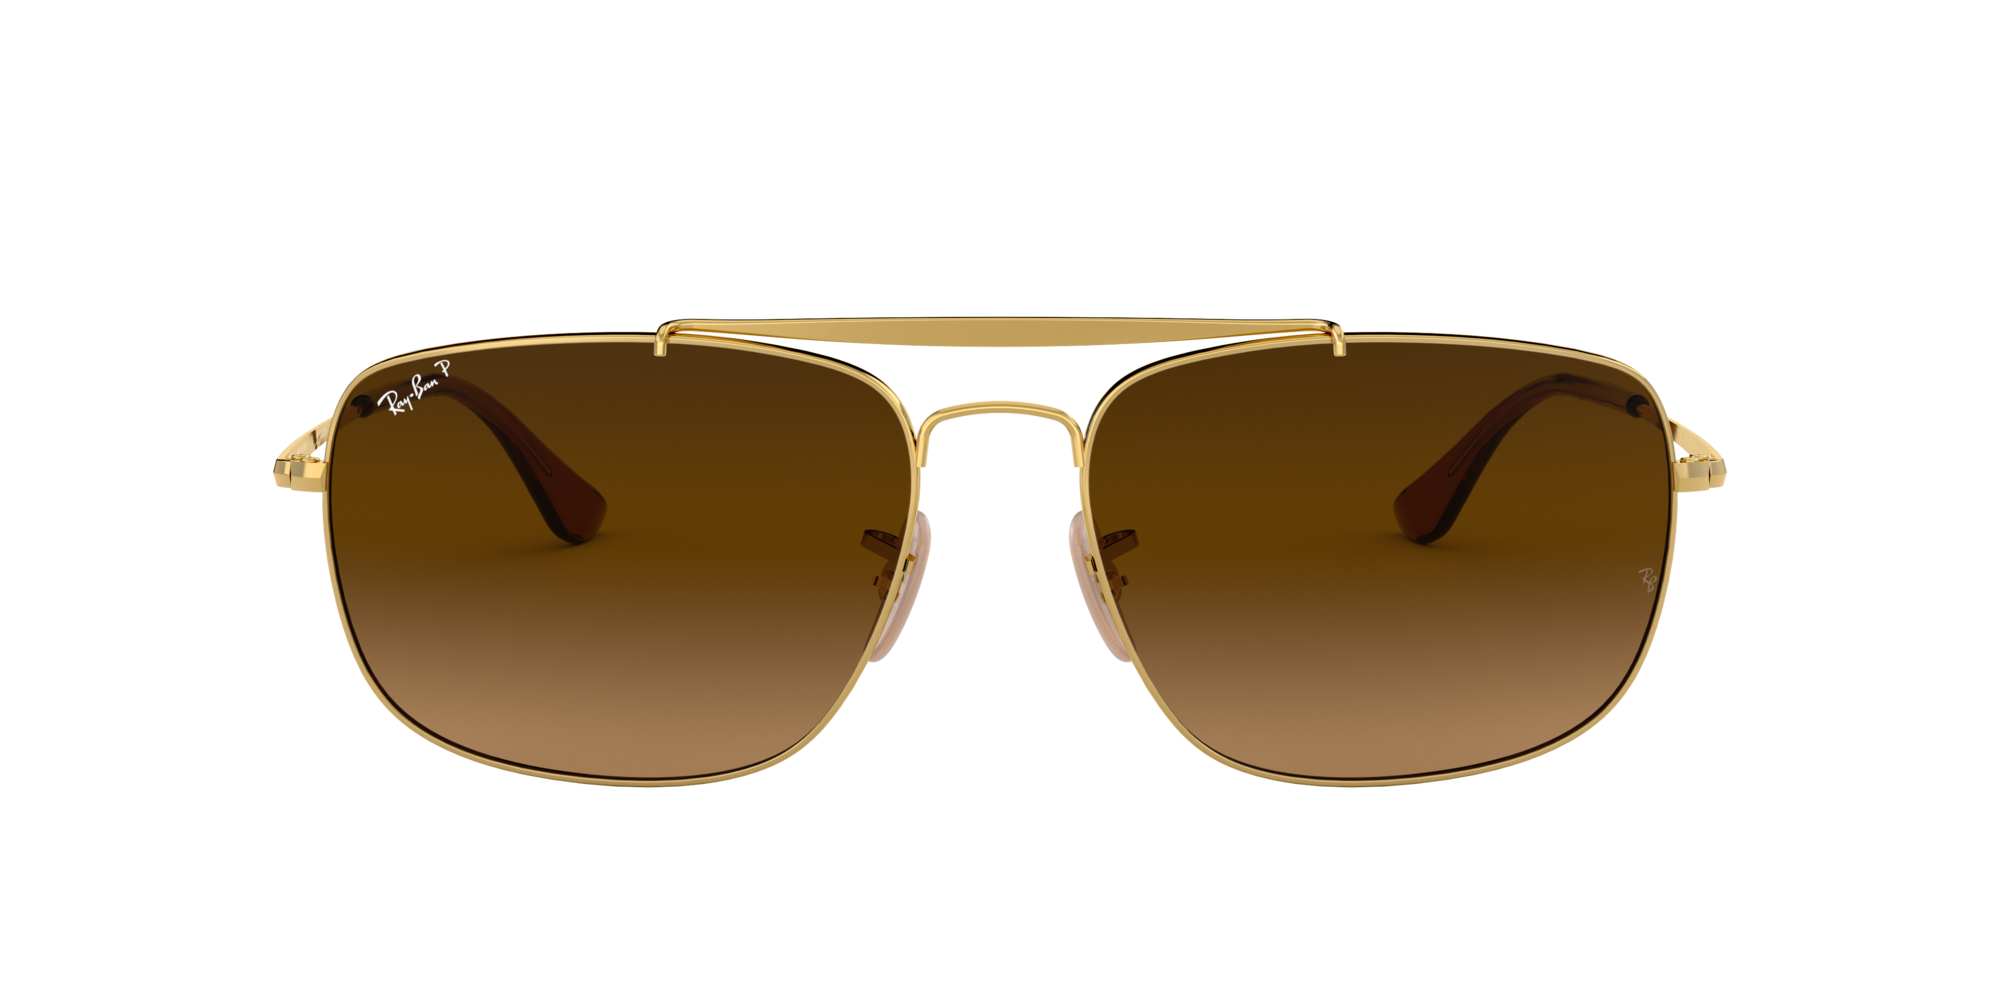 Ray-Ban RB3560 COLONEL 61 Brown \u0026 Gold 